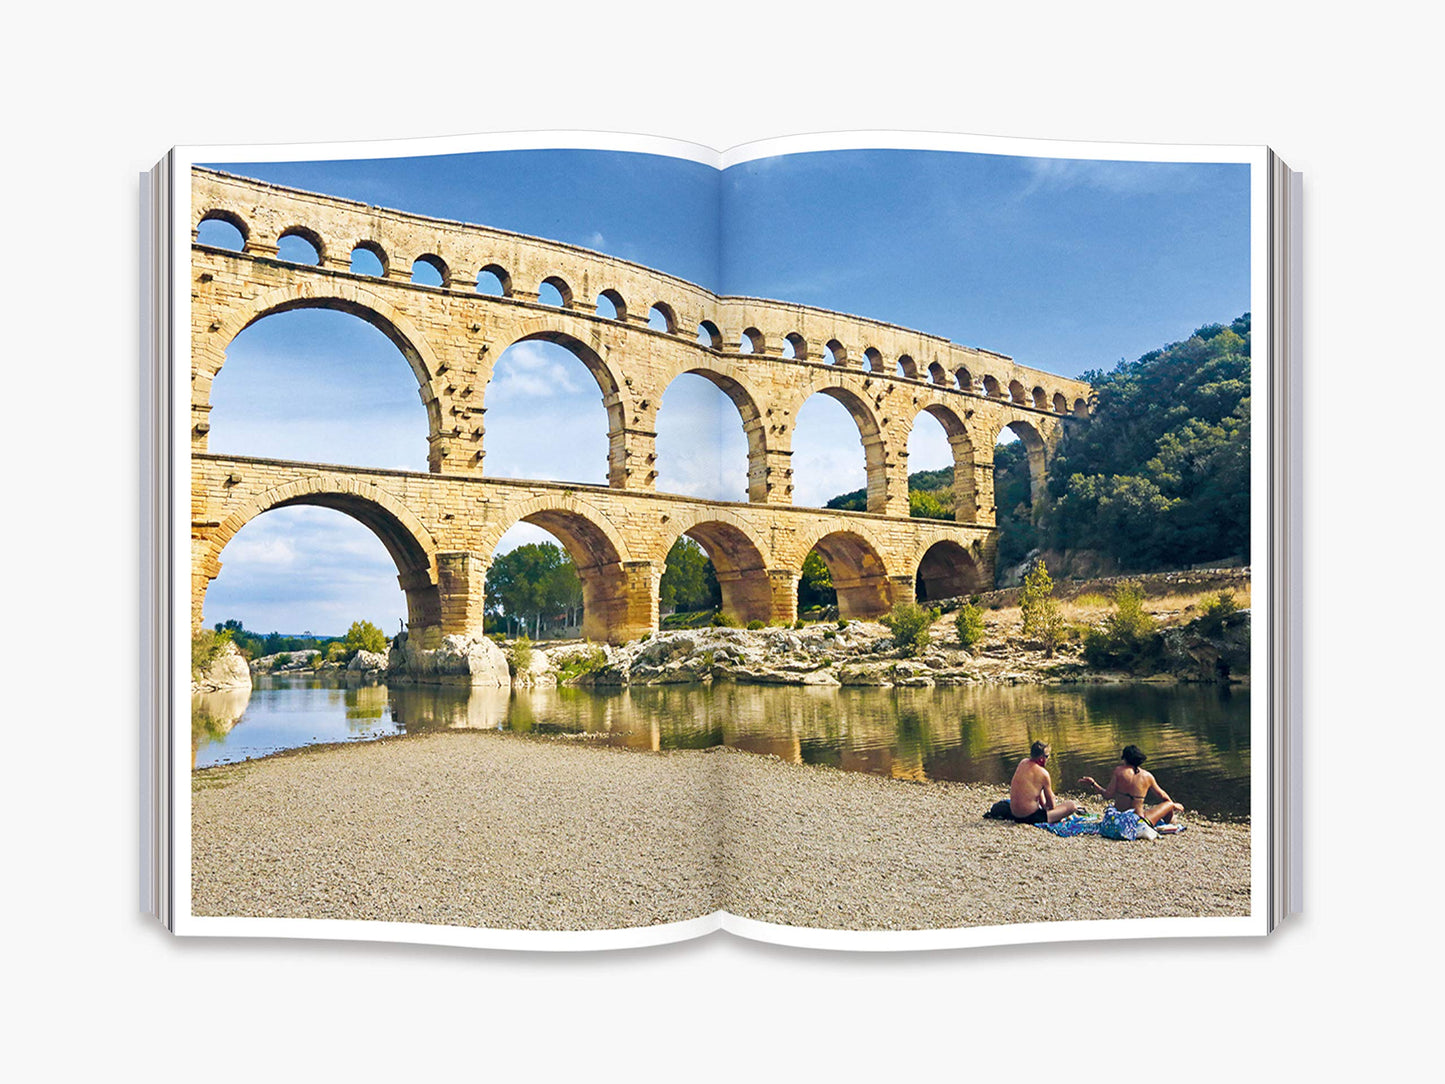 The New Map France: Unforgettable Experiences for The Discerning Traveller - Herbert Ypma